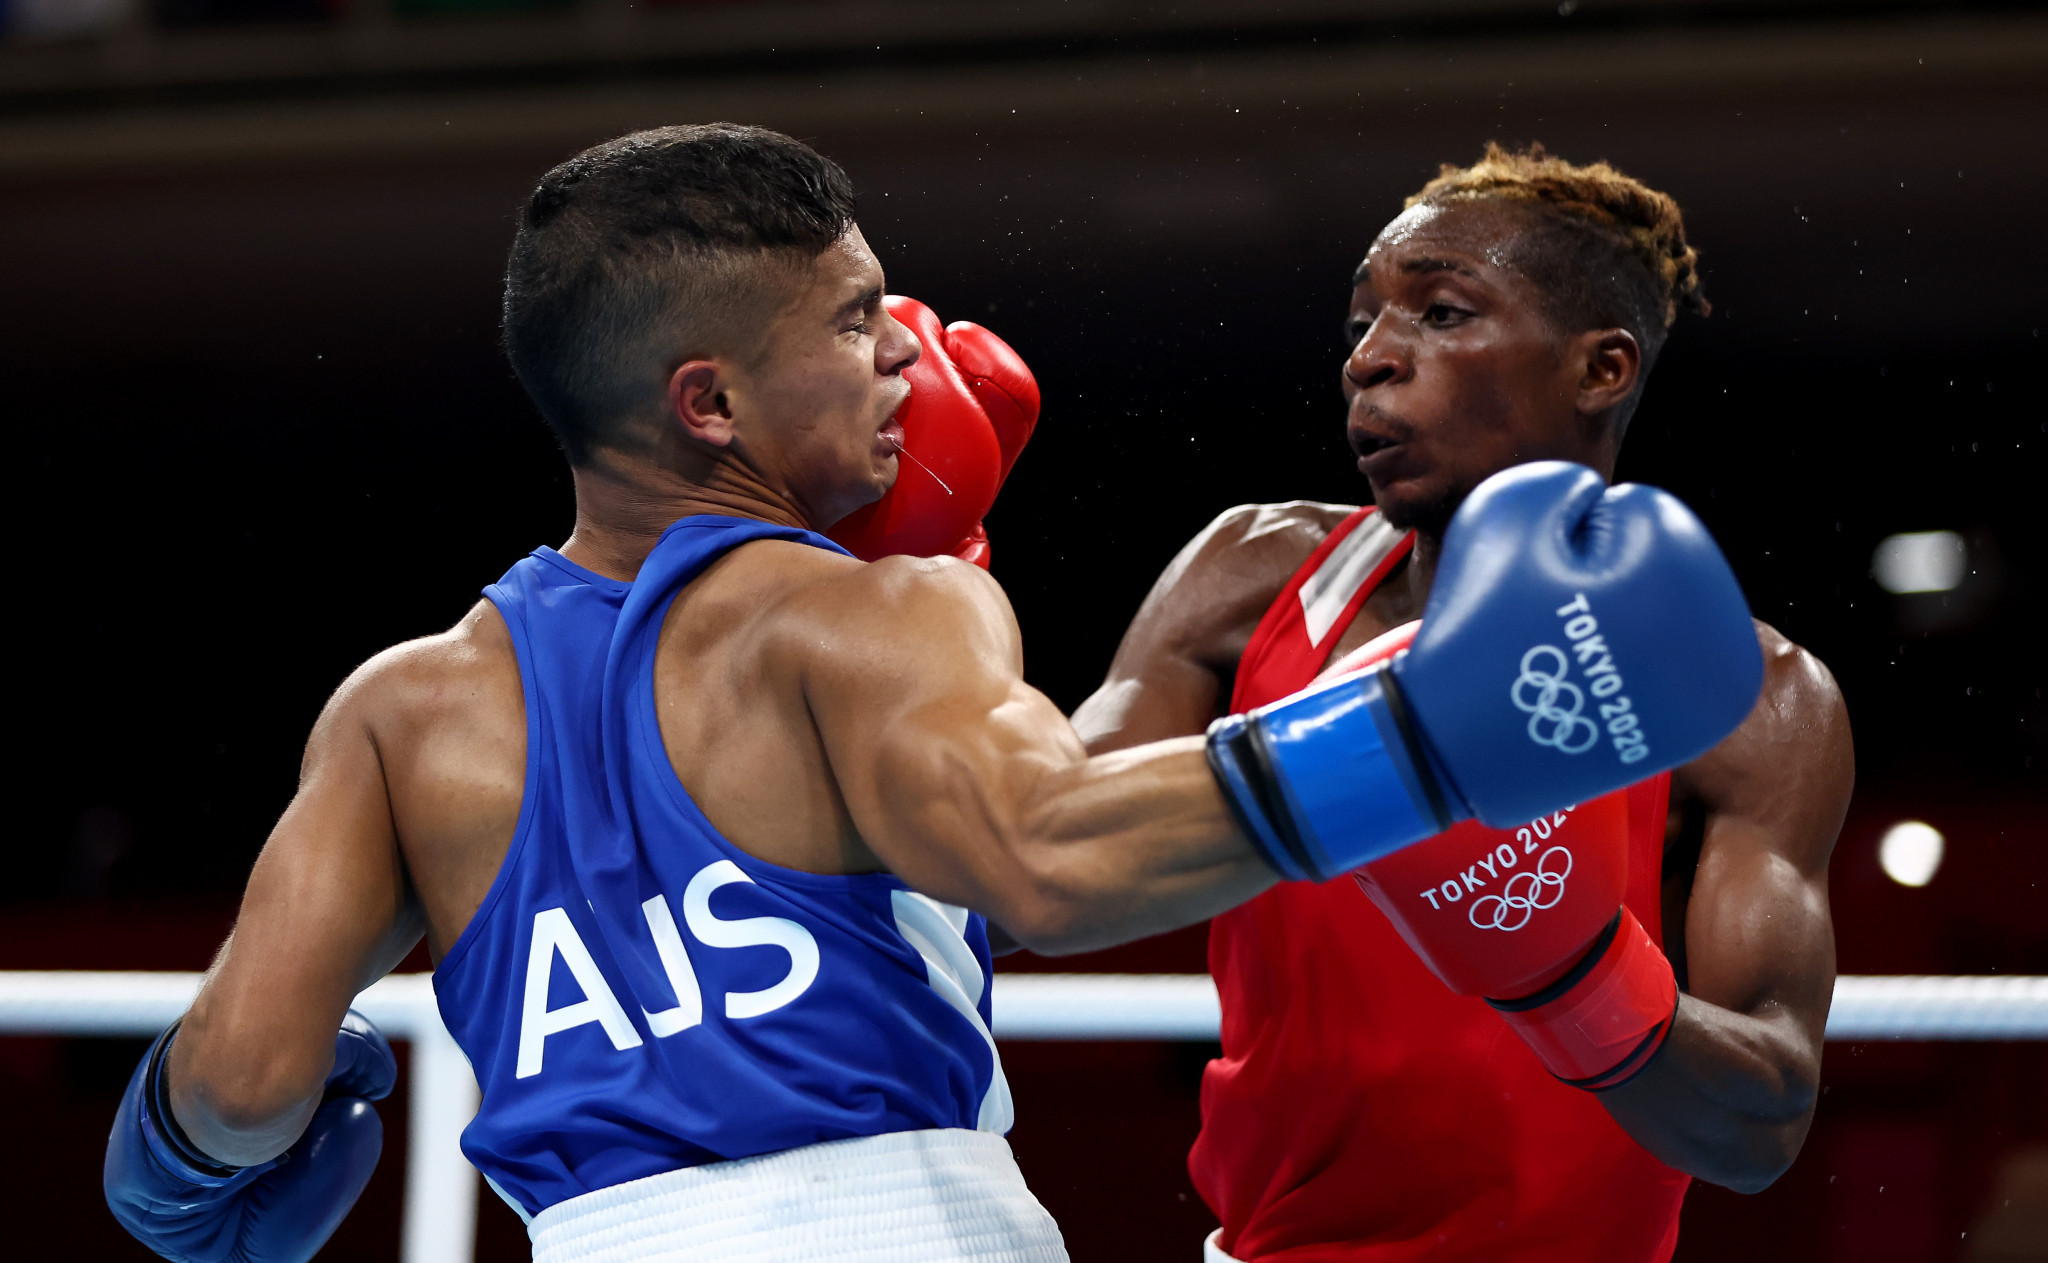 Only three Australian boxers will be entered to fight at AIBA's Men's World Championships, with one of them Alex Winwood, in blue ©Getty Images